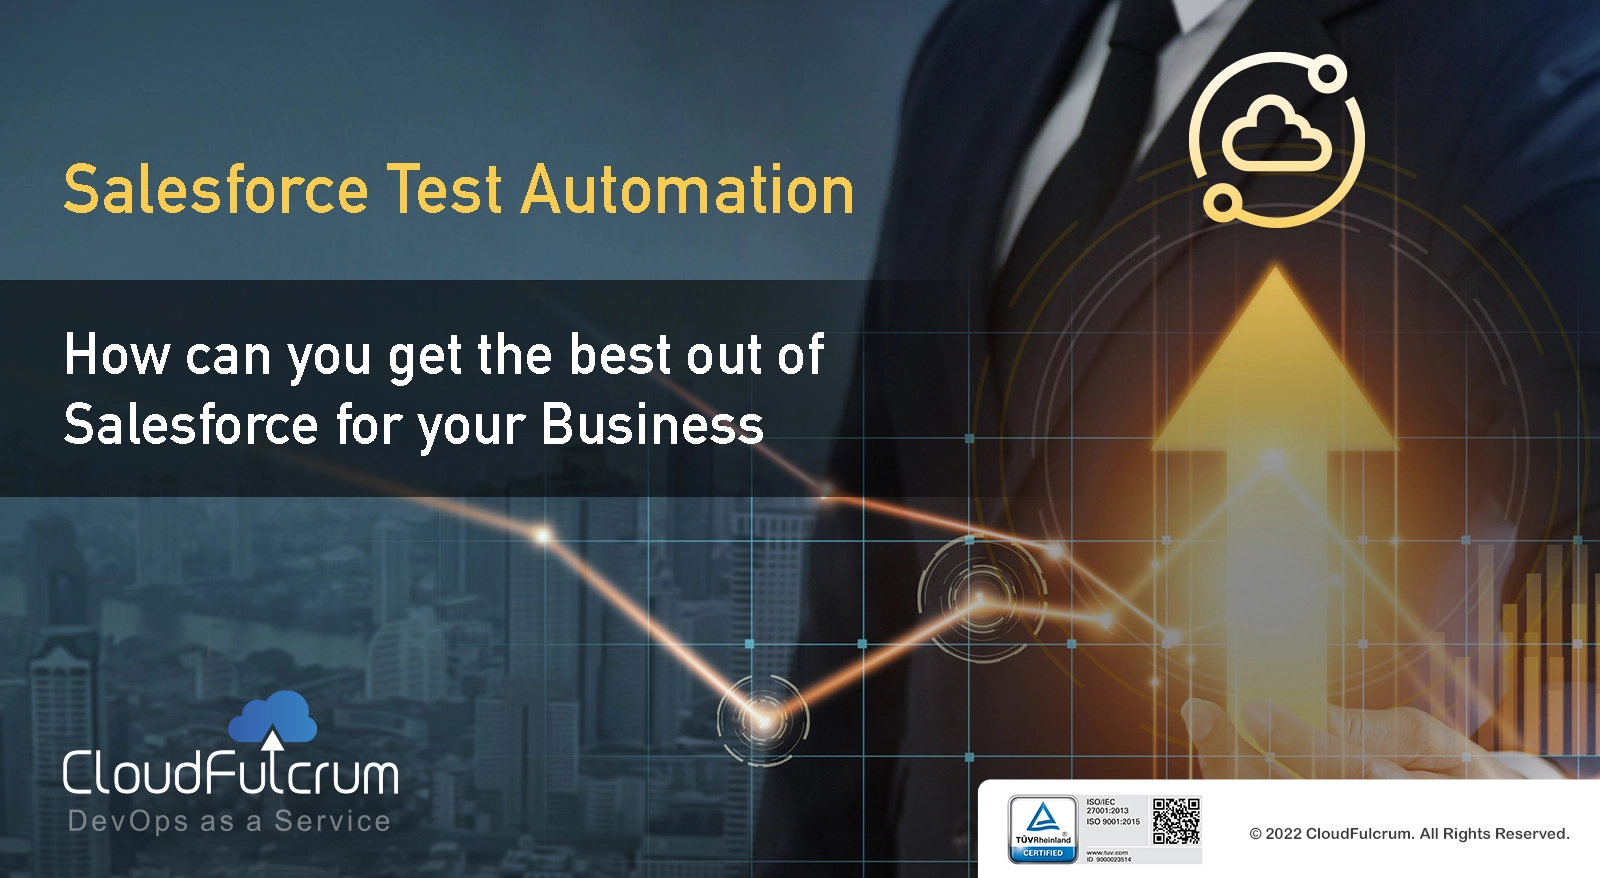 Salesforce Test Automation – How Can you Get the Best Out of Salesforce for Your Business